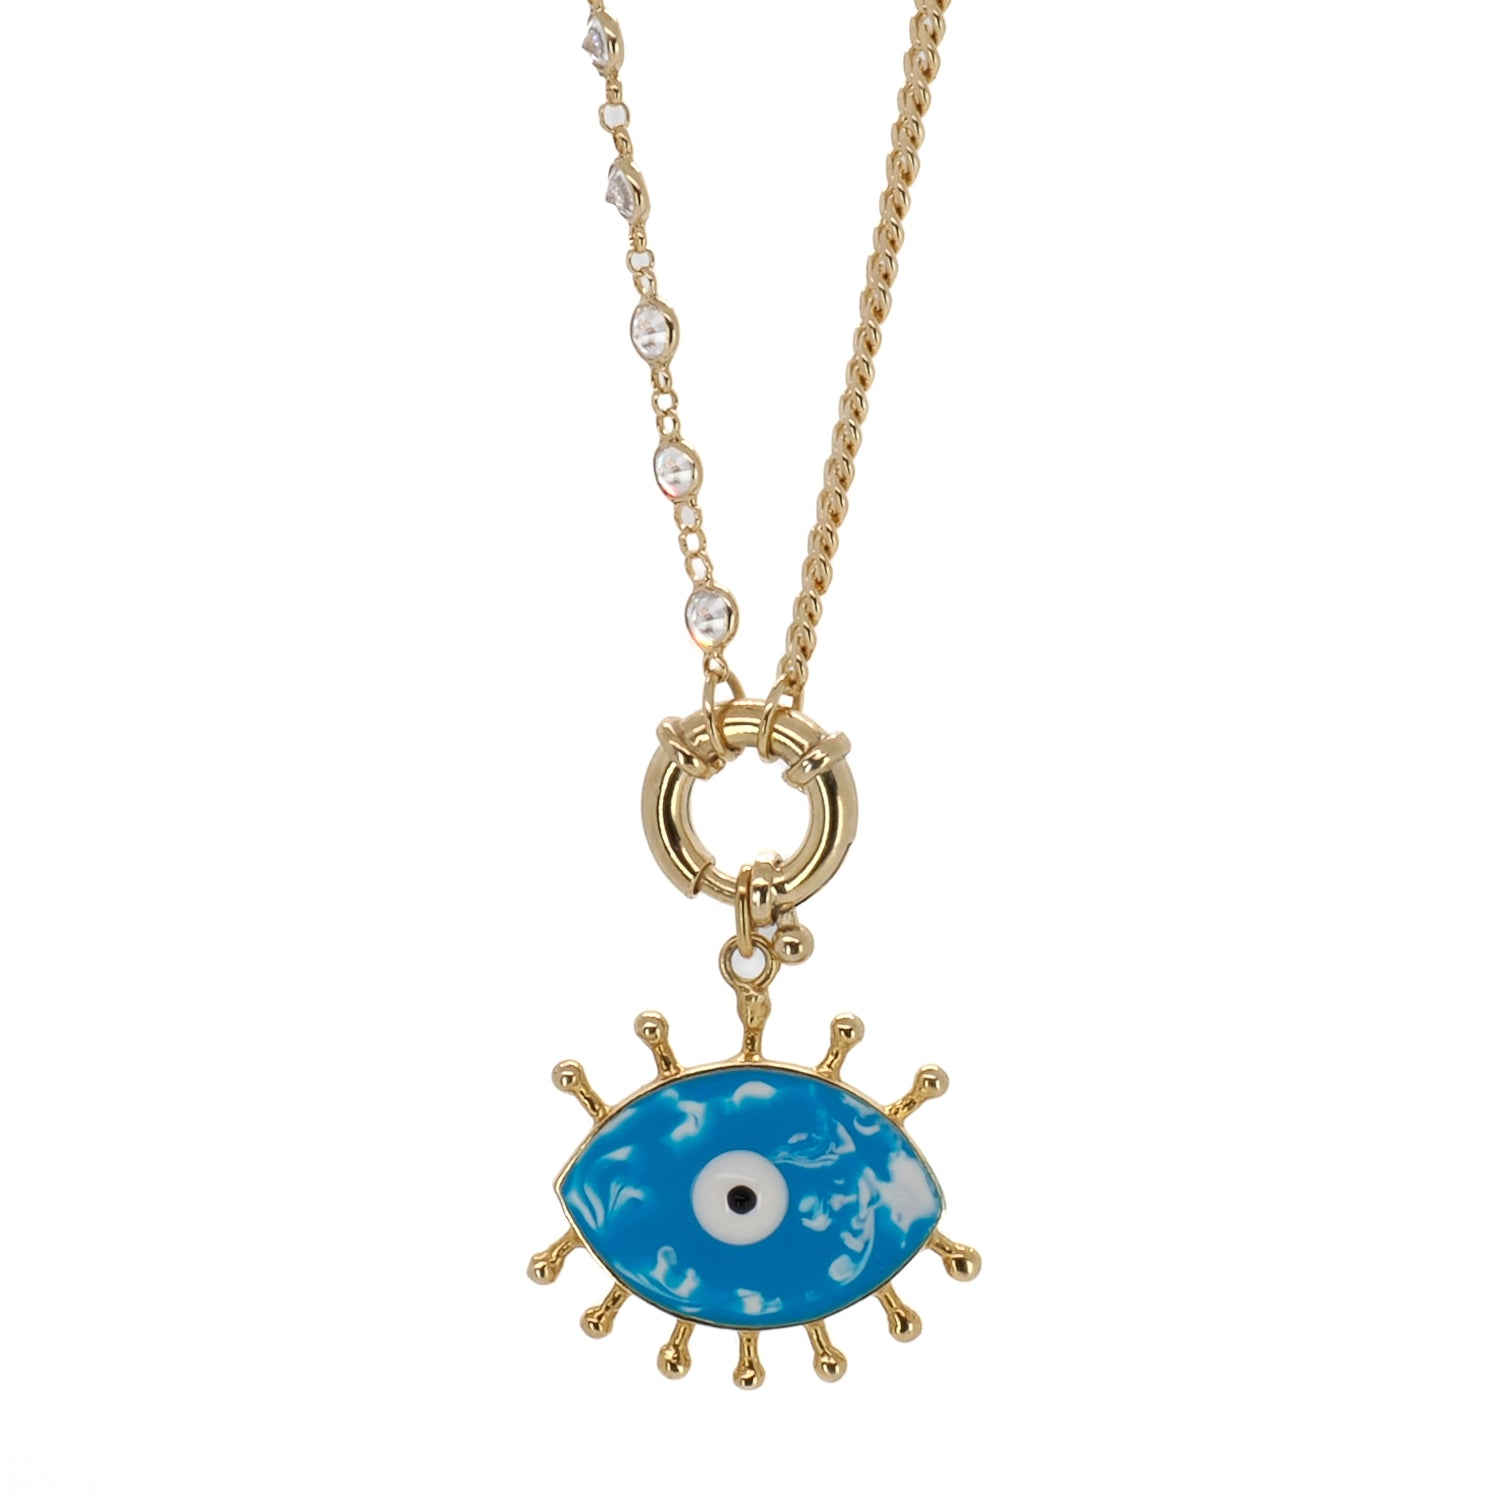 The Turquoise Evil Eye Chain Necklace, a stunning handmade piece with a protective Evil Eye pendant and Swarovski stones.